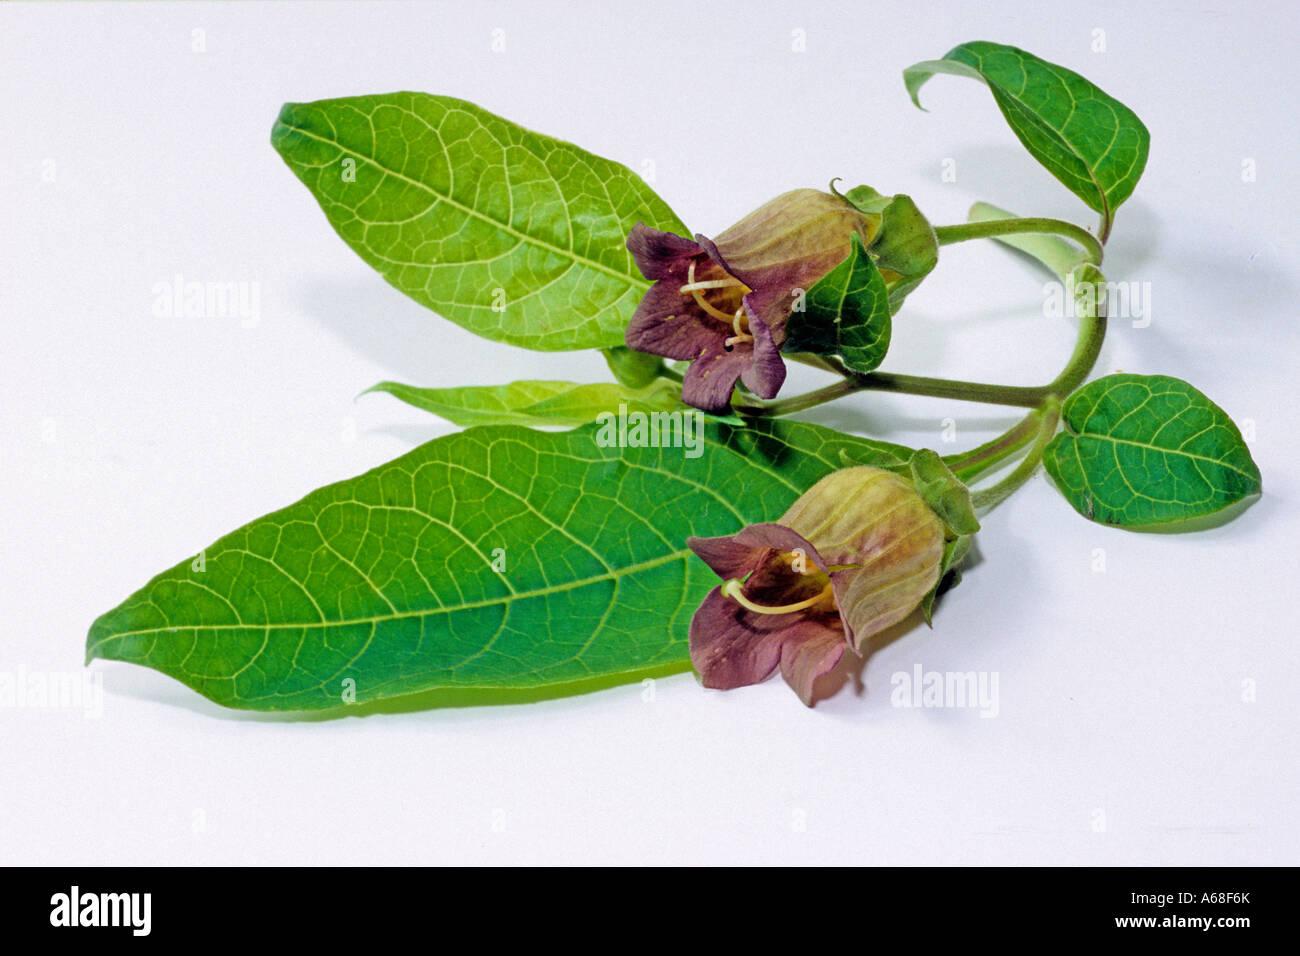 Belladonna, Deadly Nightshade Devils Cherry (Atropa belladonna), twig with leaves and flowers, studio picture Stock Photo